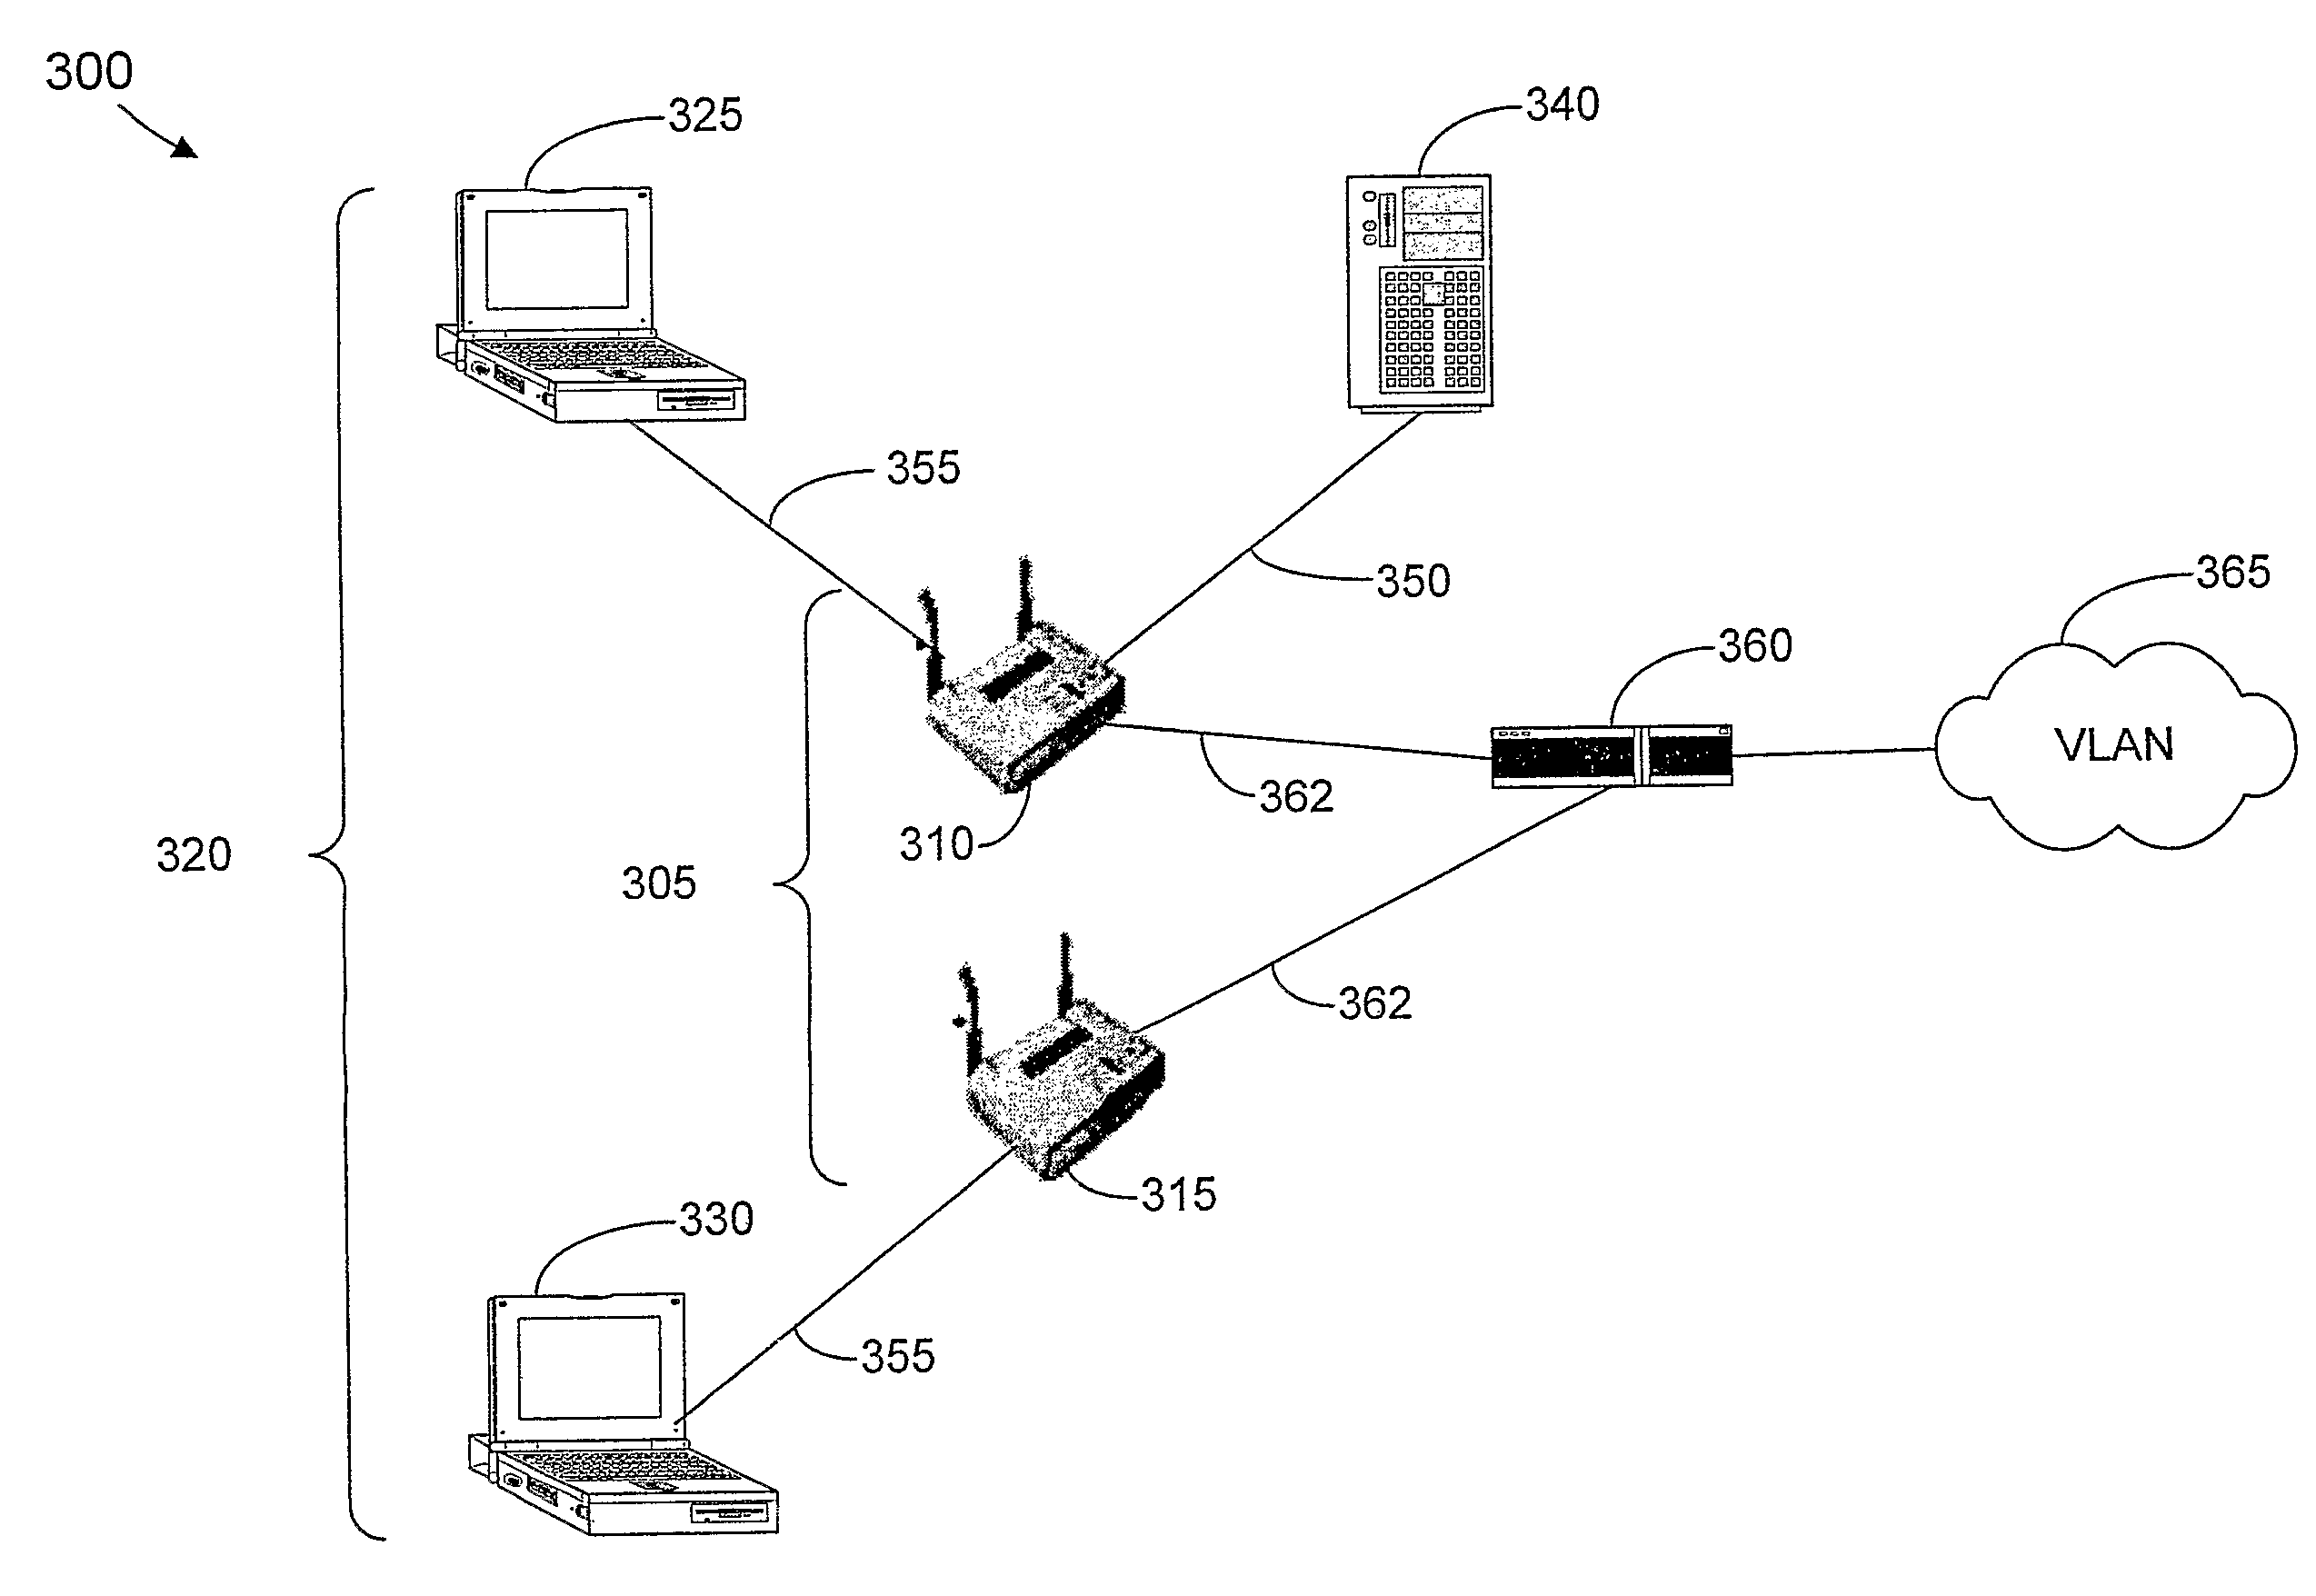 Method and apparatus for providing quality of service to VoIP over 802.11 wireless LANs